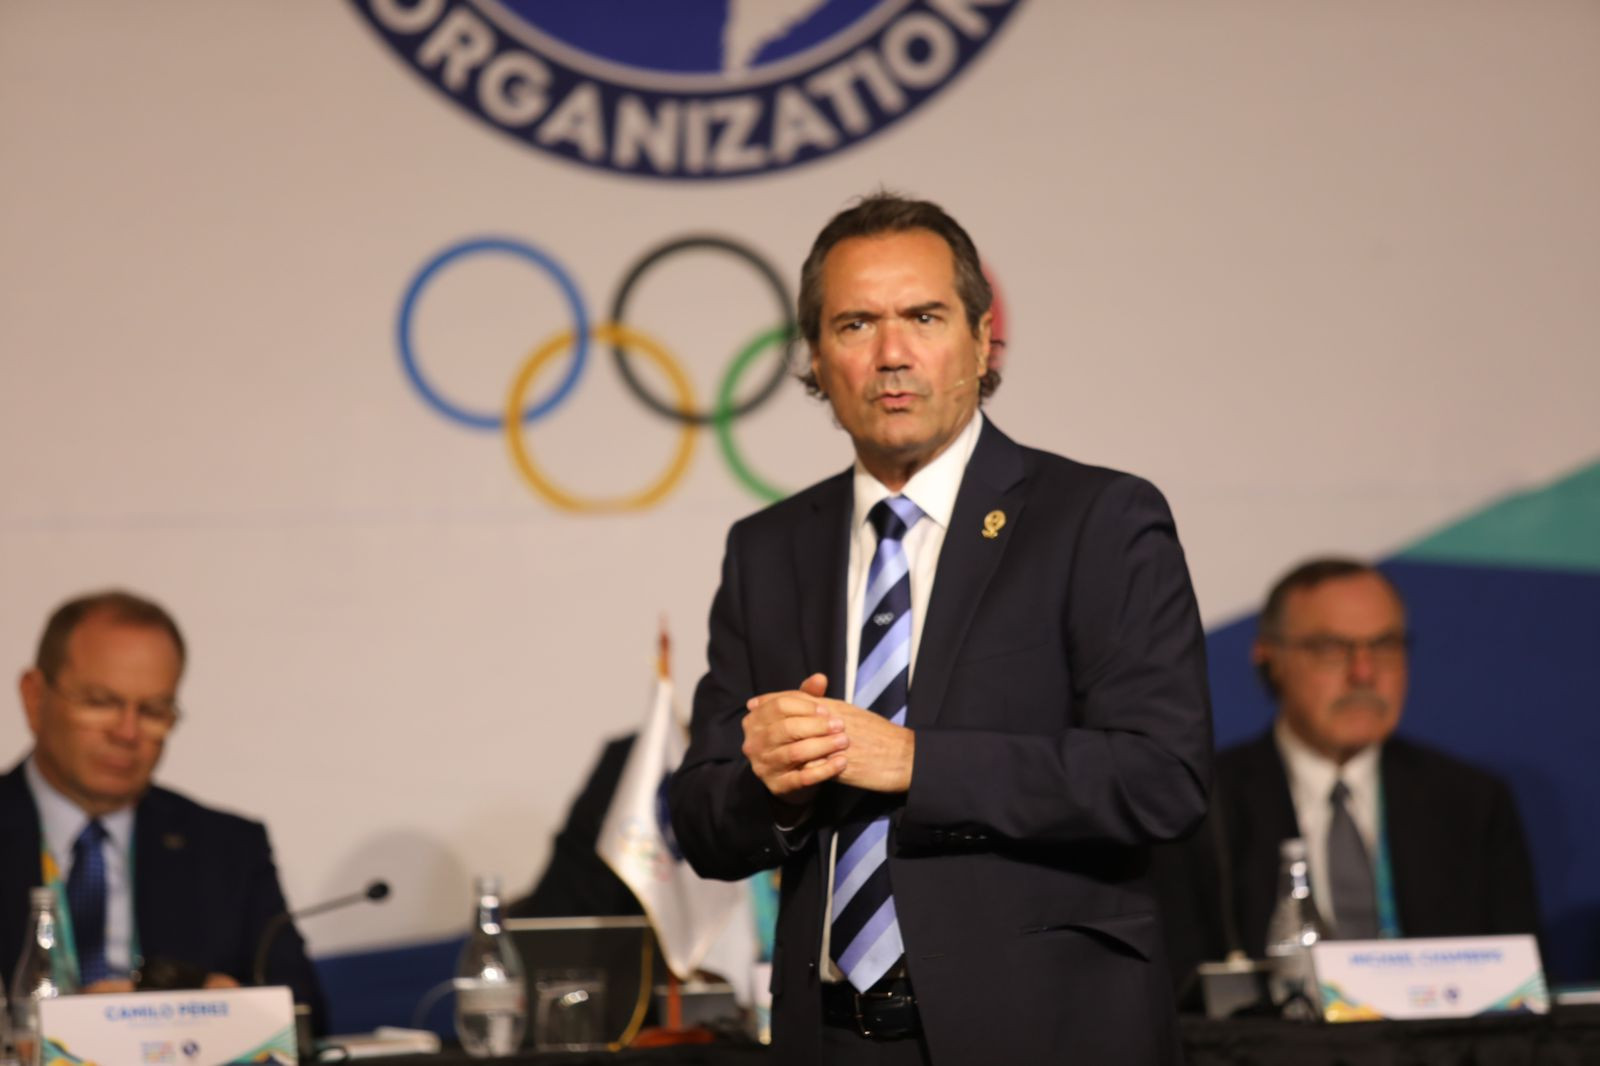 Exclusive: Panam Sports plans to reduce sports programme for Barranquilla 2027